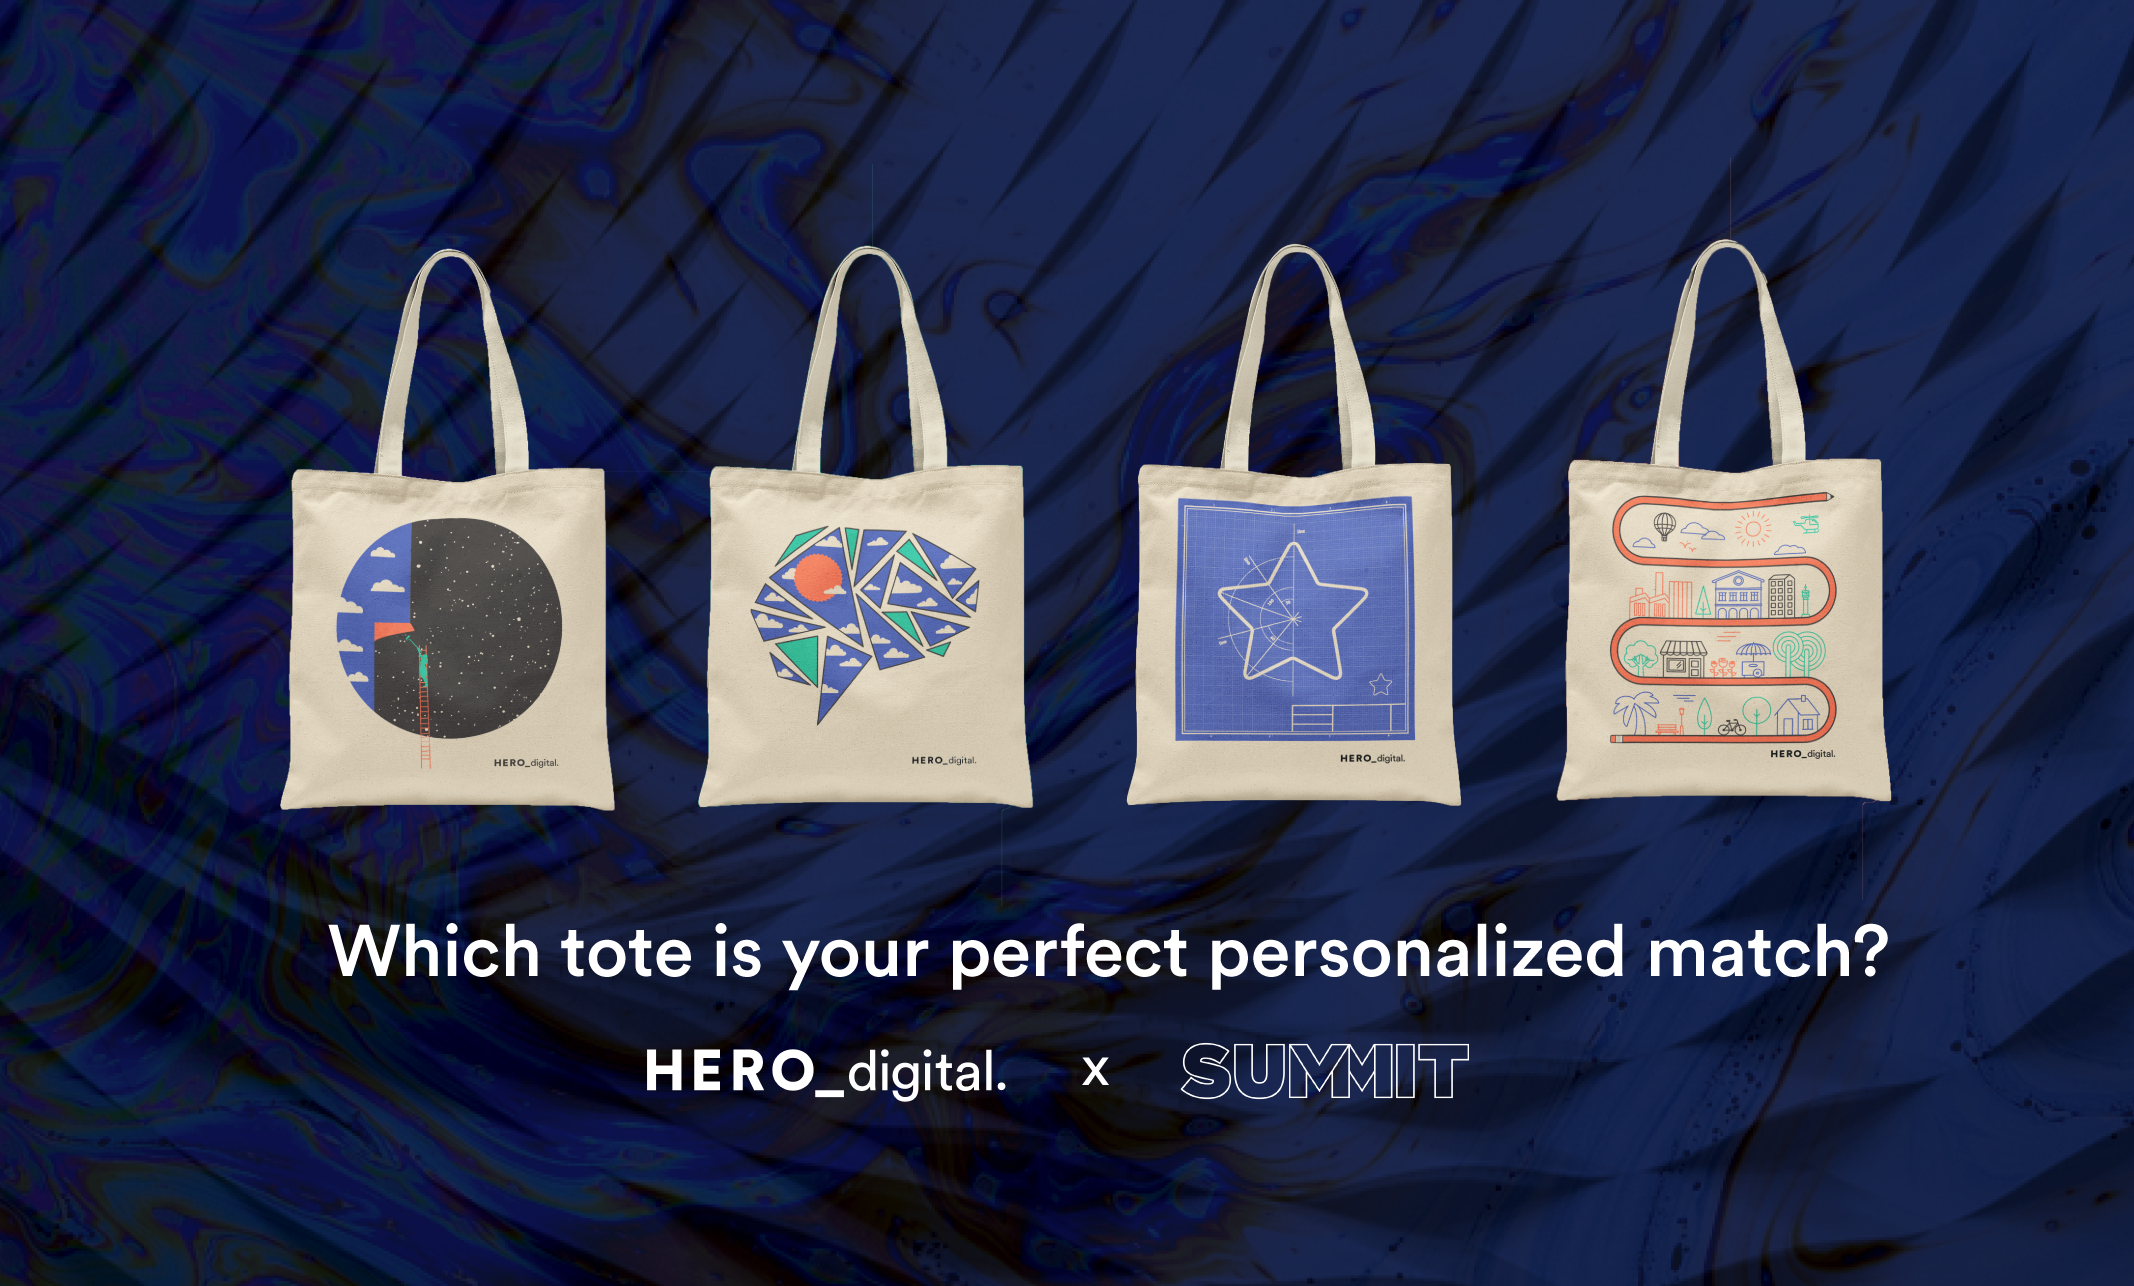 Four tote bags with Lil Tuffy designs and text "Which tote is your perfect personalized match?" with Hero Digital and Adobe Summit logos